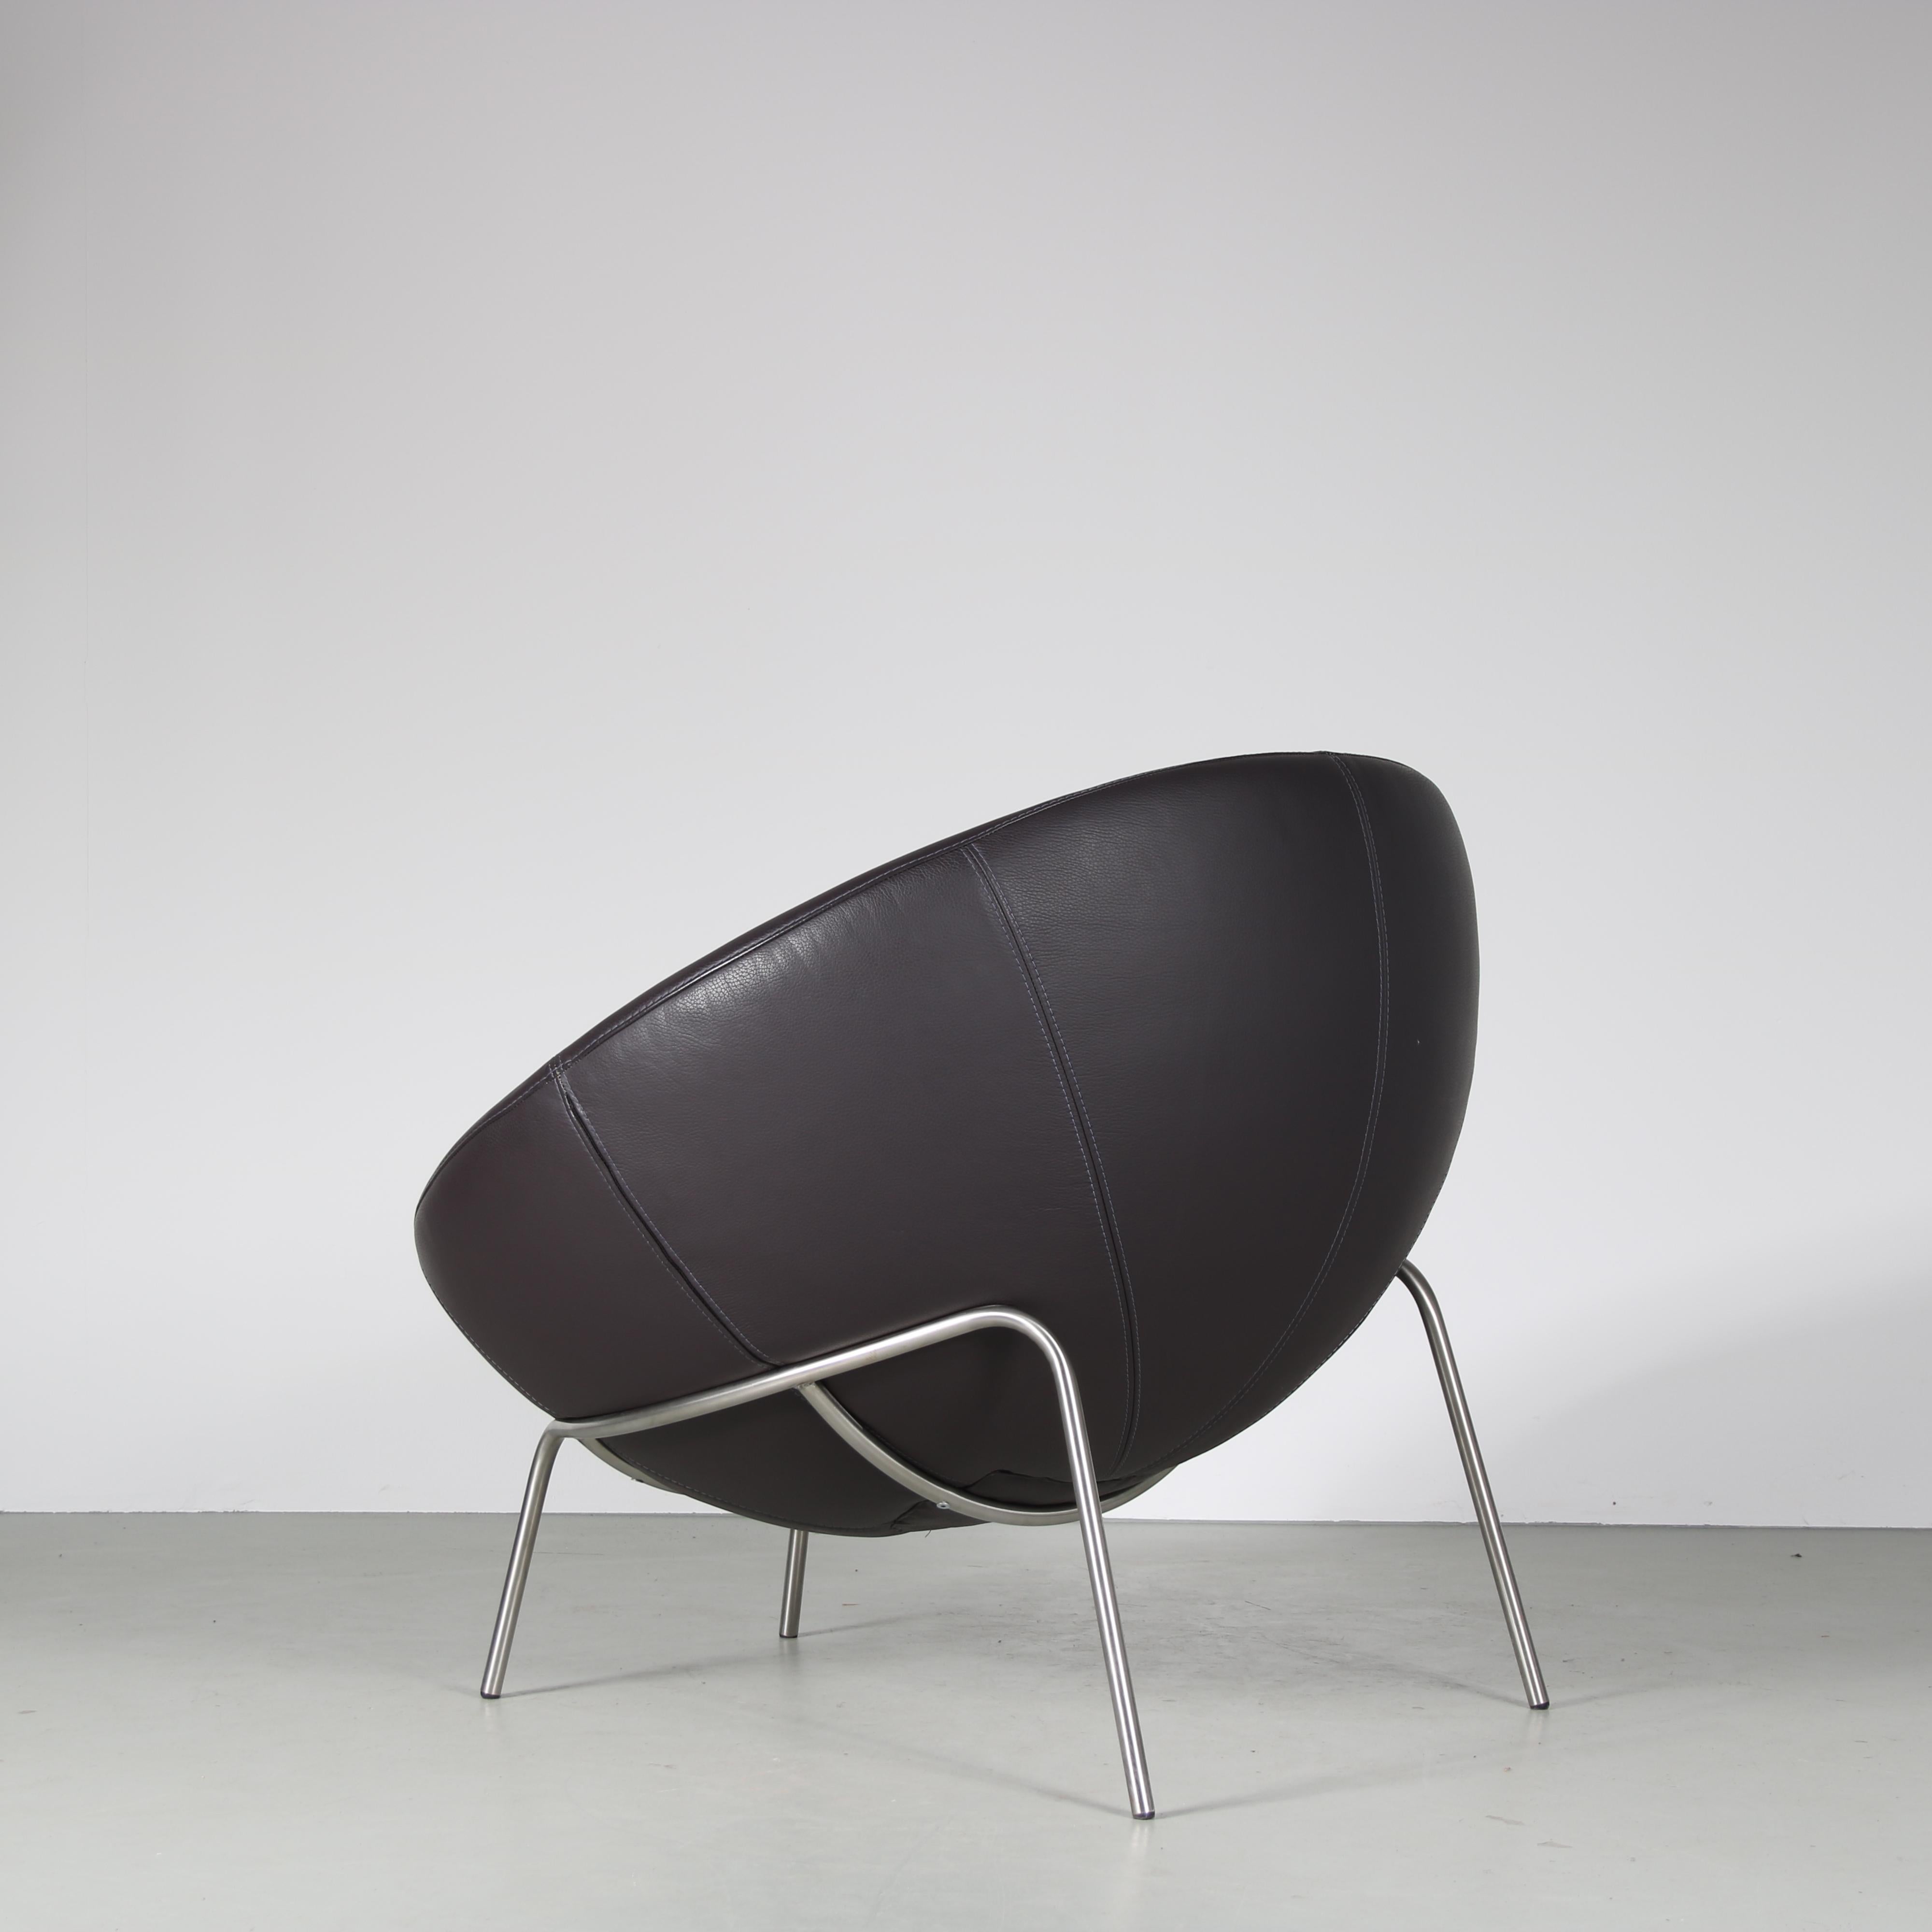 Leather 2000s Lounge chair by Bert Plantagie from the Netherlands